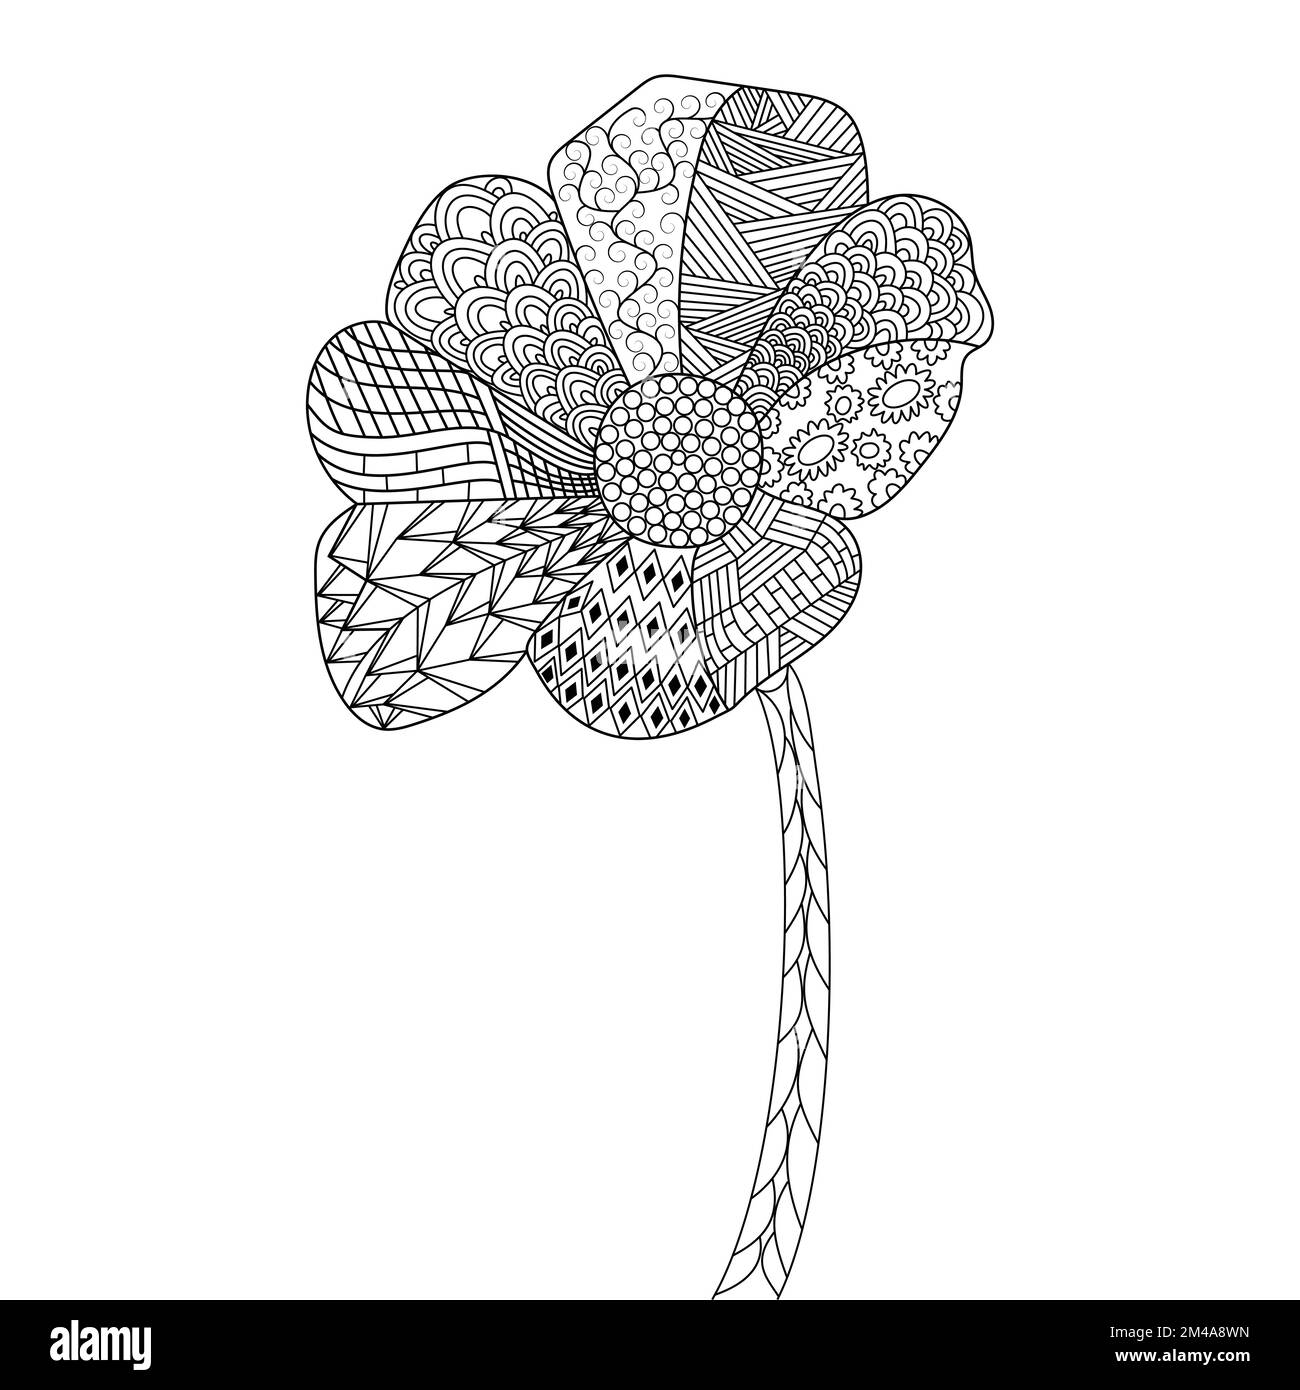 sunflower of zentangle coloring page with decorative flower background design illustration Stock Vector